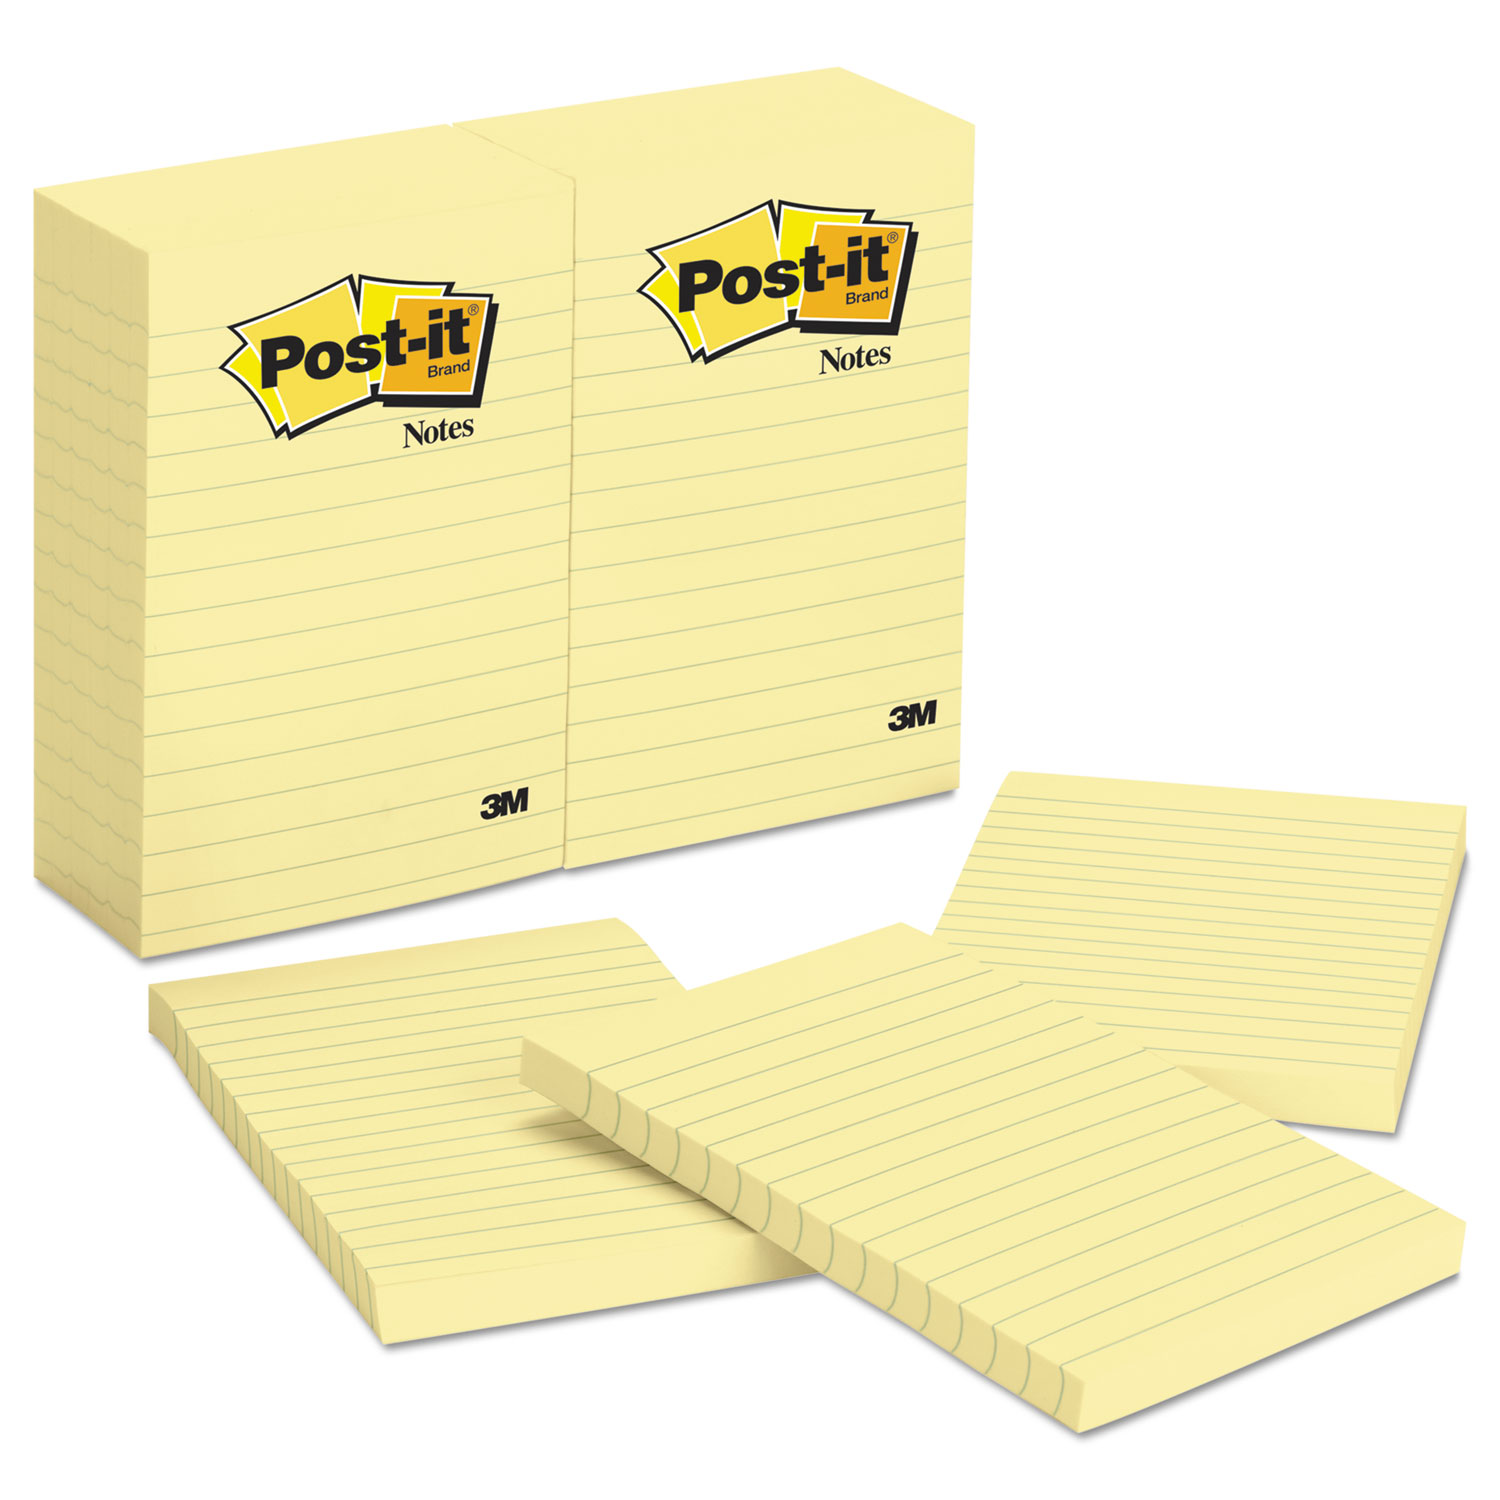  Post-it Notes 660 Original Pads in Canary Yellow, Lined, 4 x 6, 100-Sheet, 12/Pack (MMM660YW) 